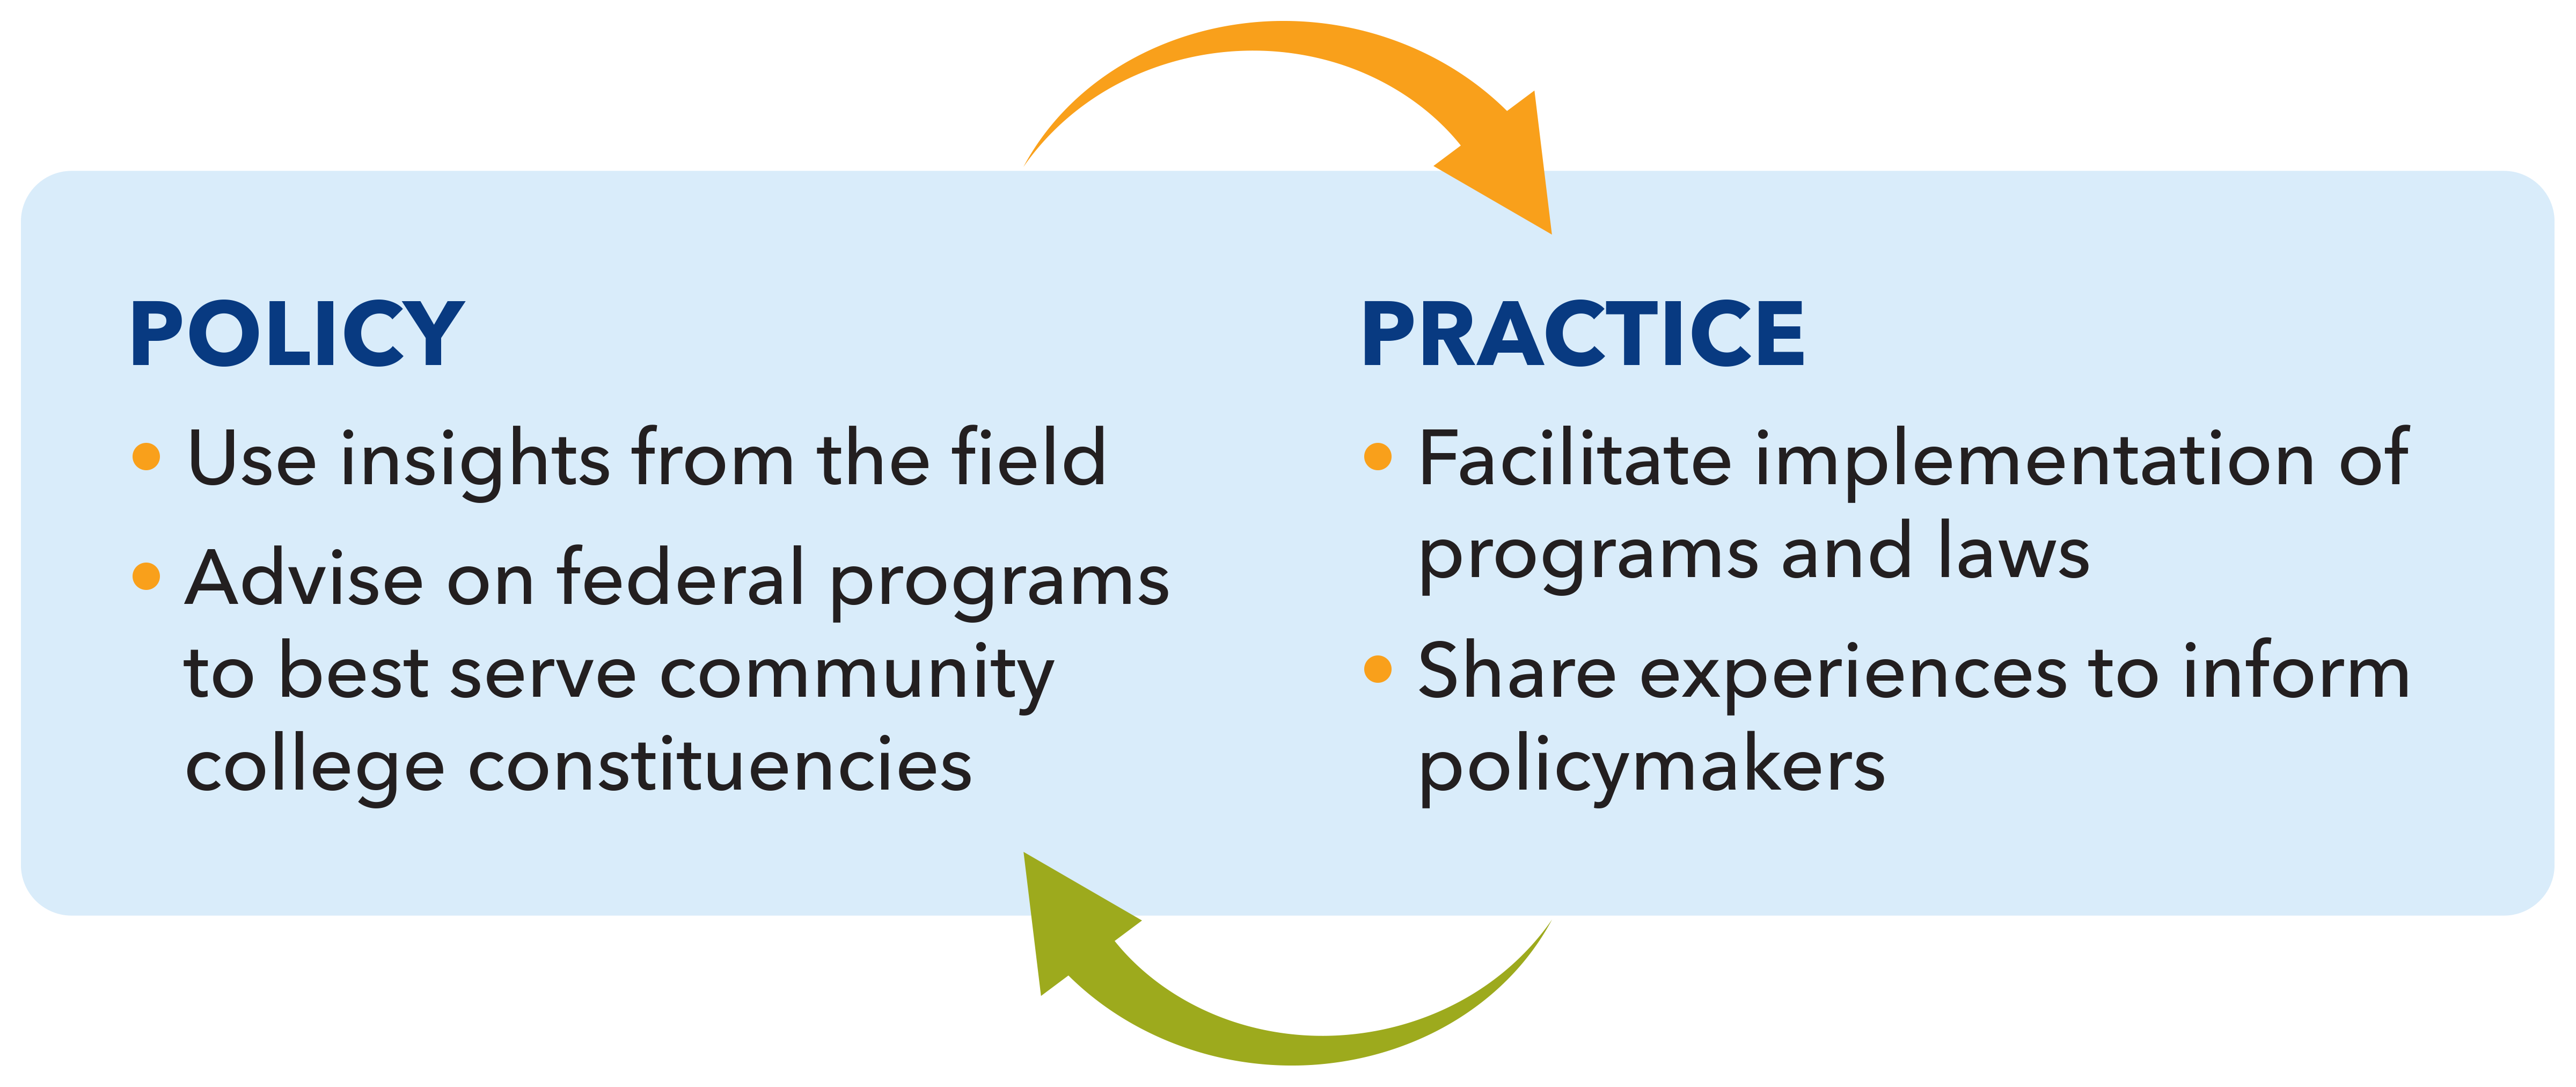 Policy informs practice and practice informs policy 